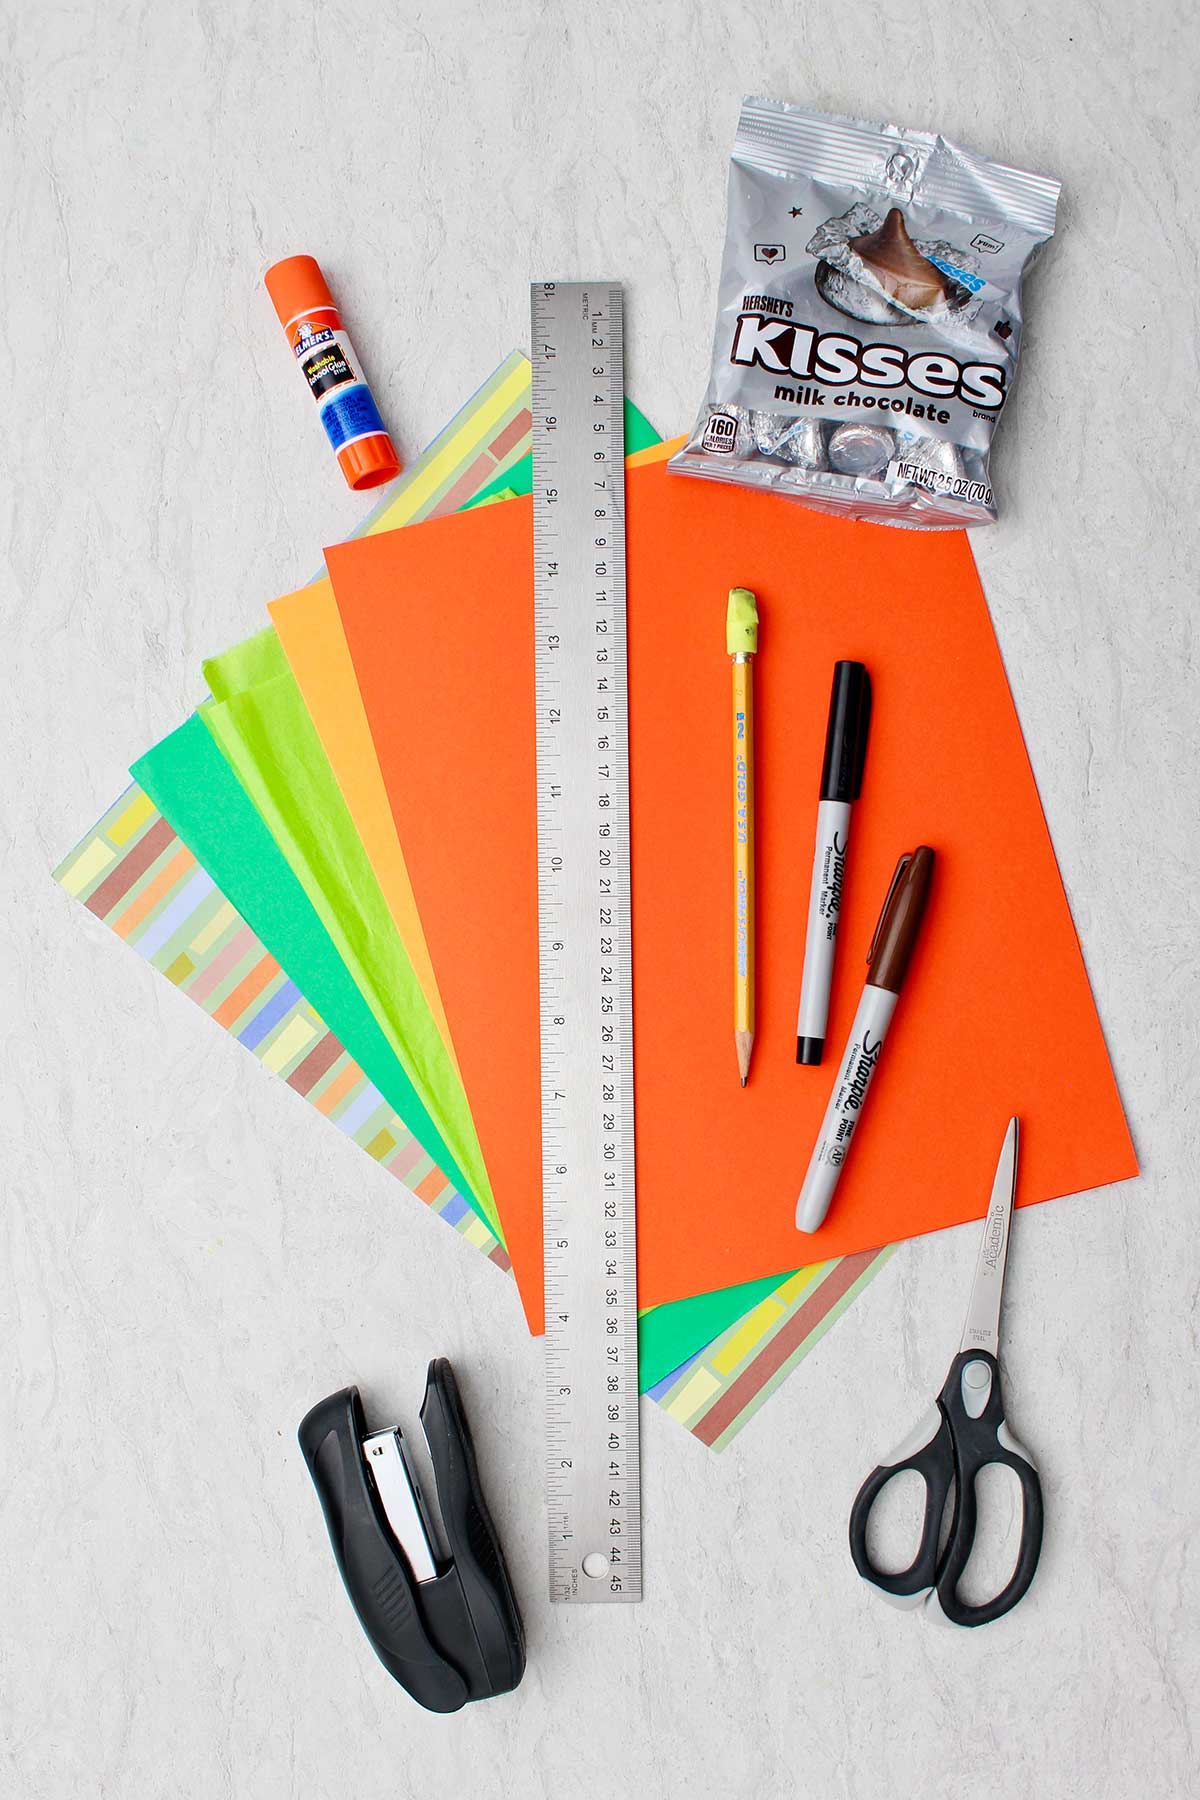 Supplies to make carrot Easter baskets. Colorful paper, glue stick, candy, scissors, pencil, markers, stapler and ruler.